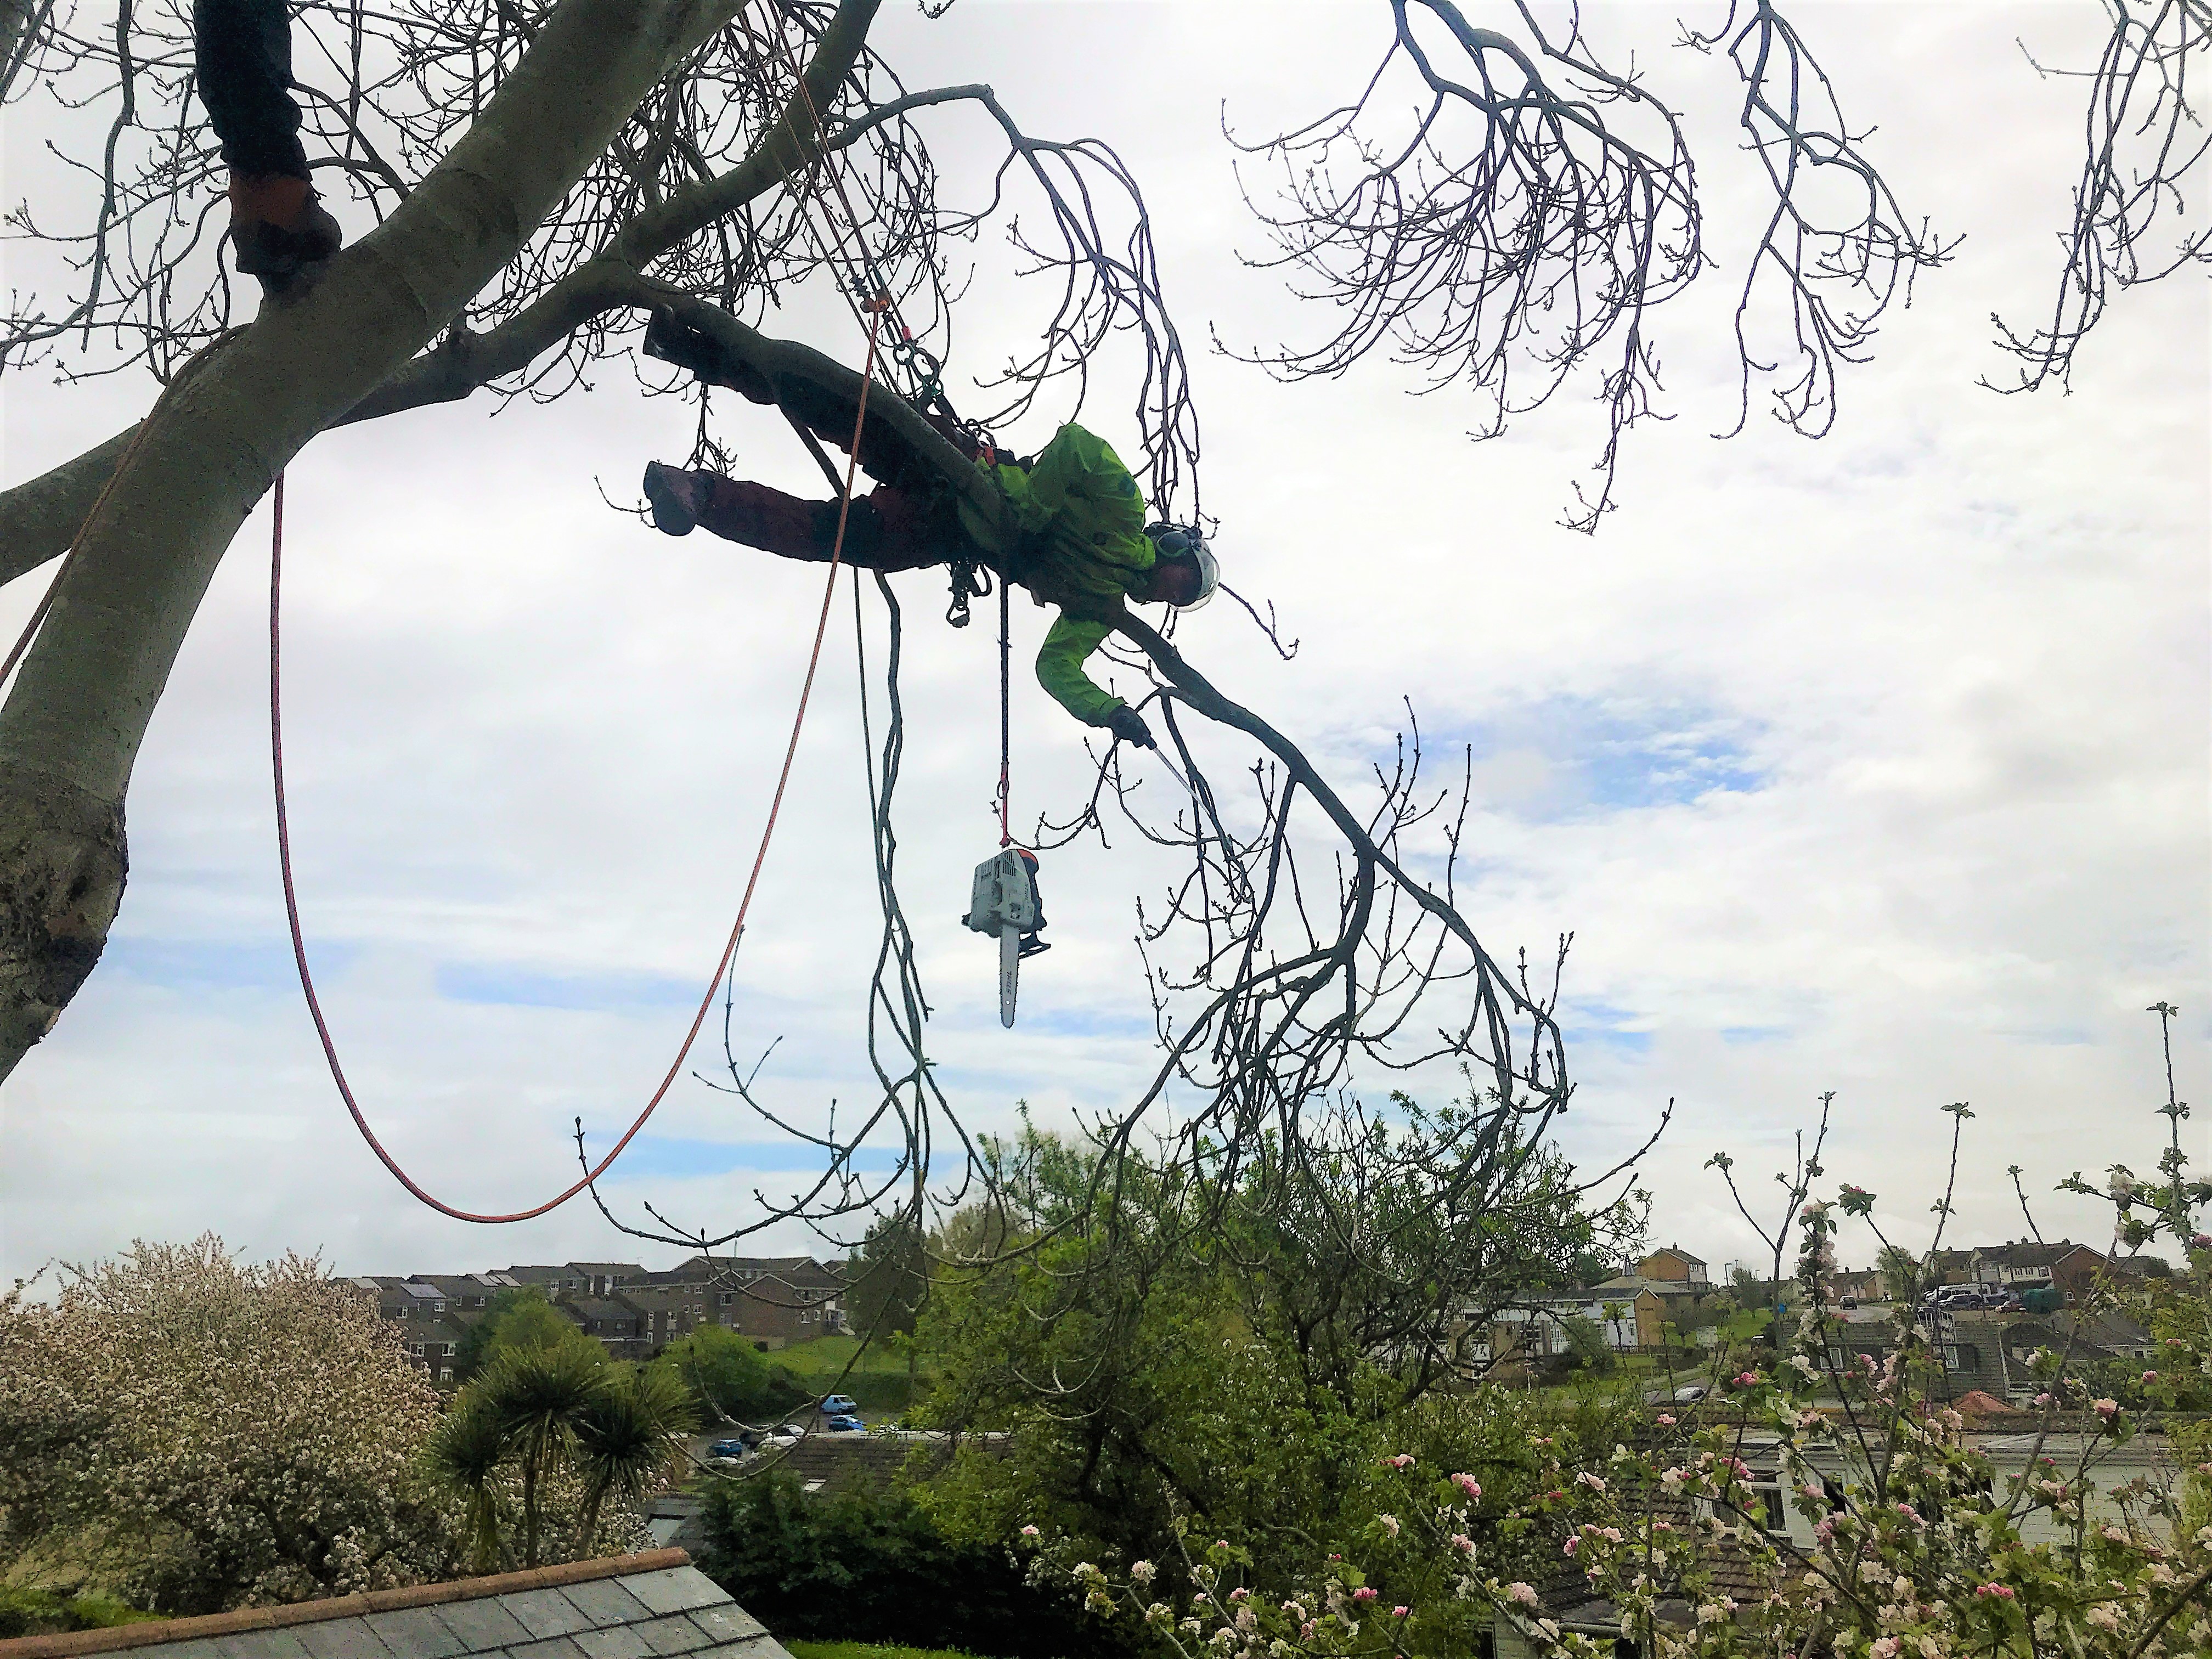 Weymouth Tree Care Services team at Dorset Treeworx Ltd - Tree care tree pruning maintenance Weymouth, Portland, Dorchester in Dorset